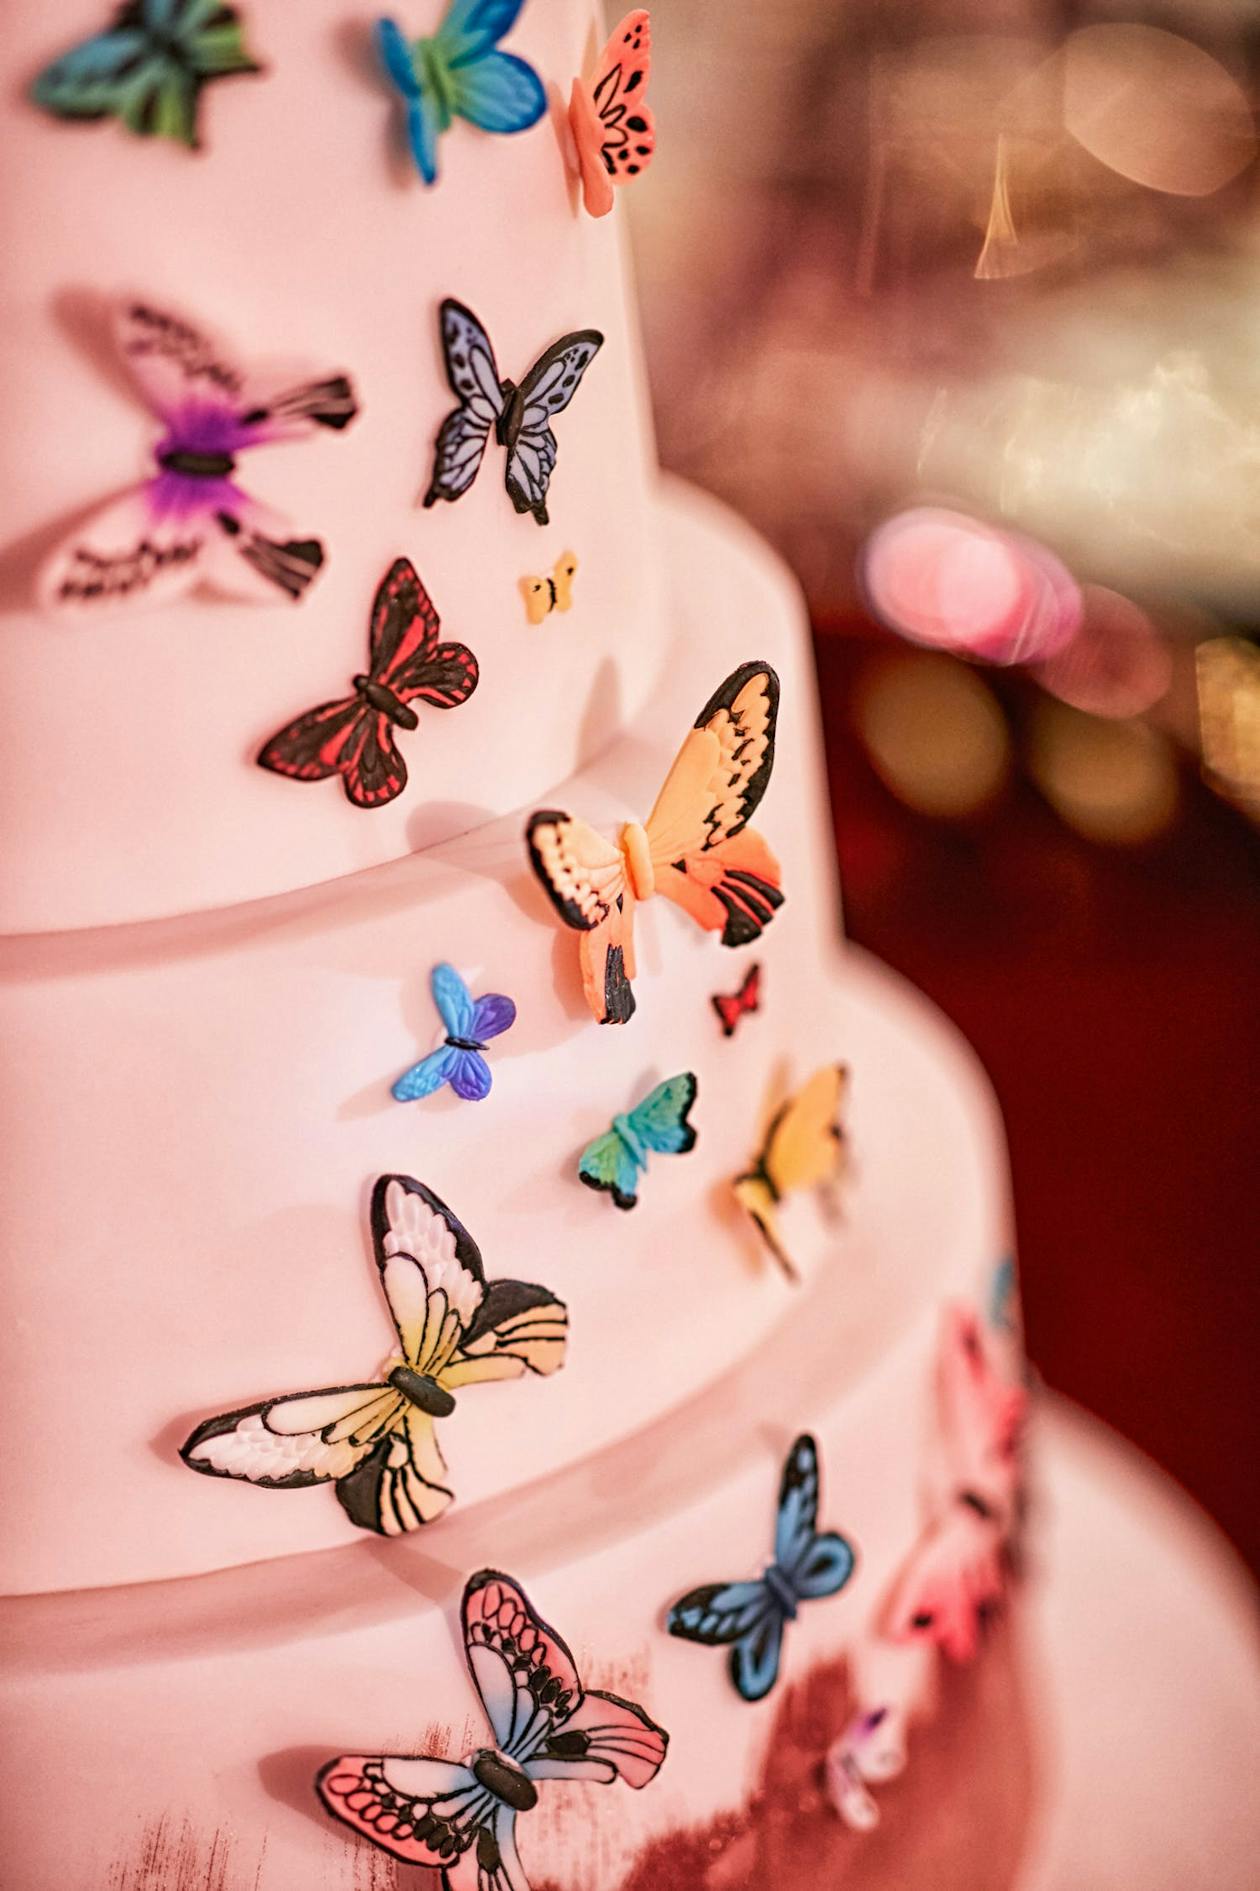 Whimsical wedding cake with butterflies | PartySlate